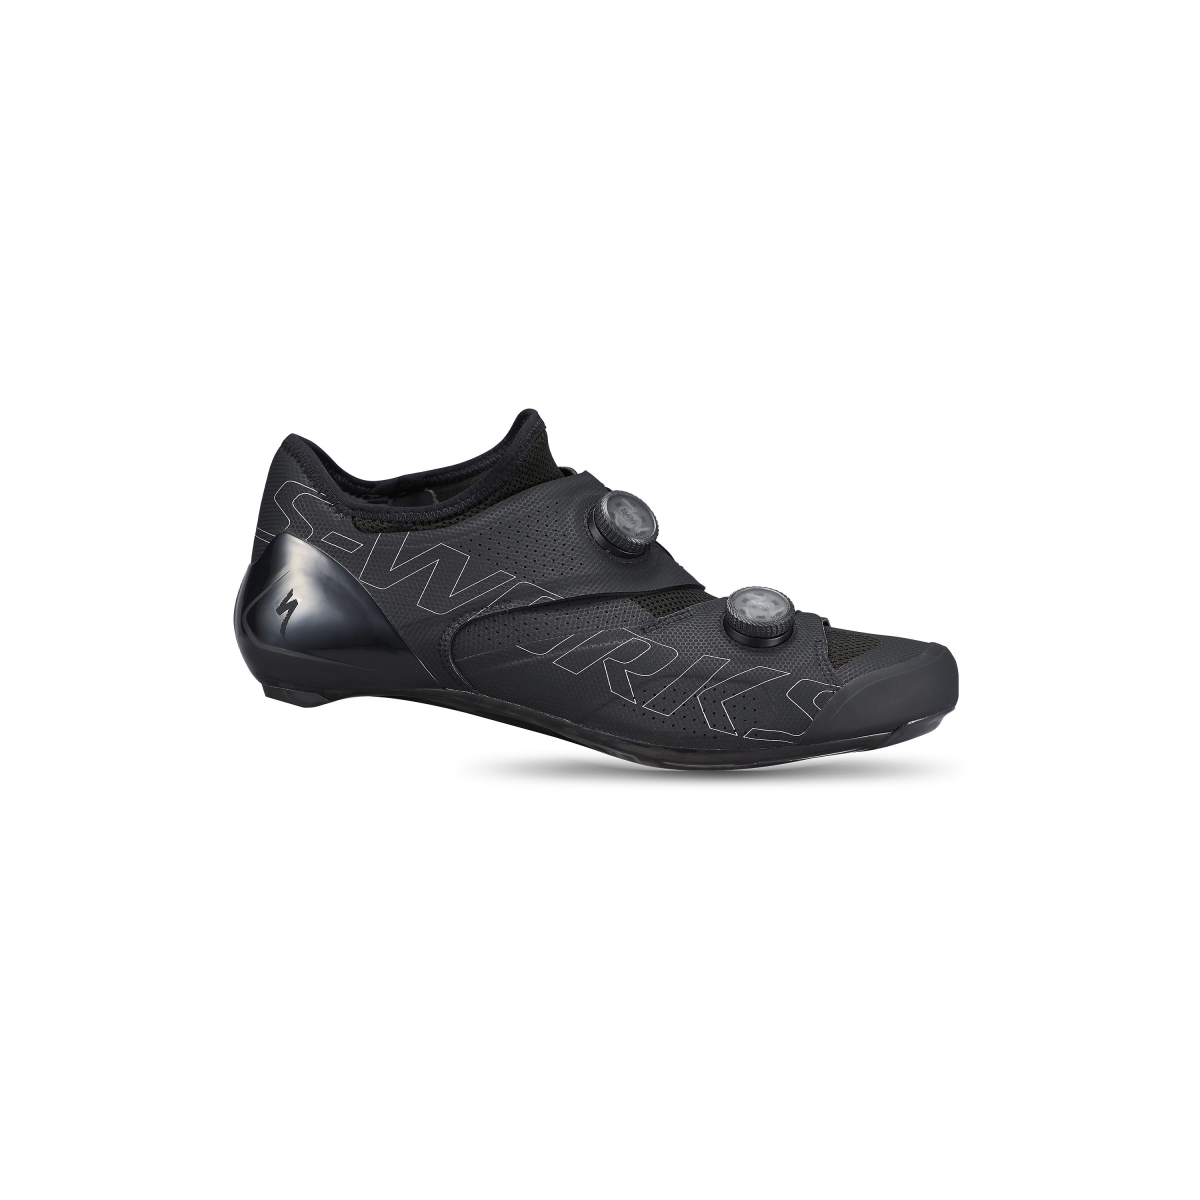 Buty rowerowe SPECIALIZED S-Works Ares - black